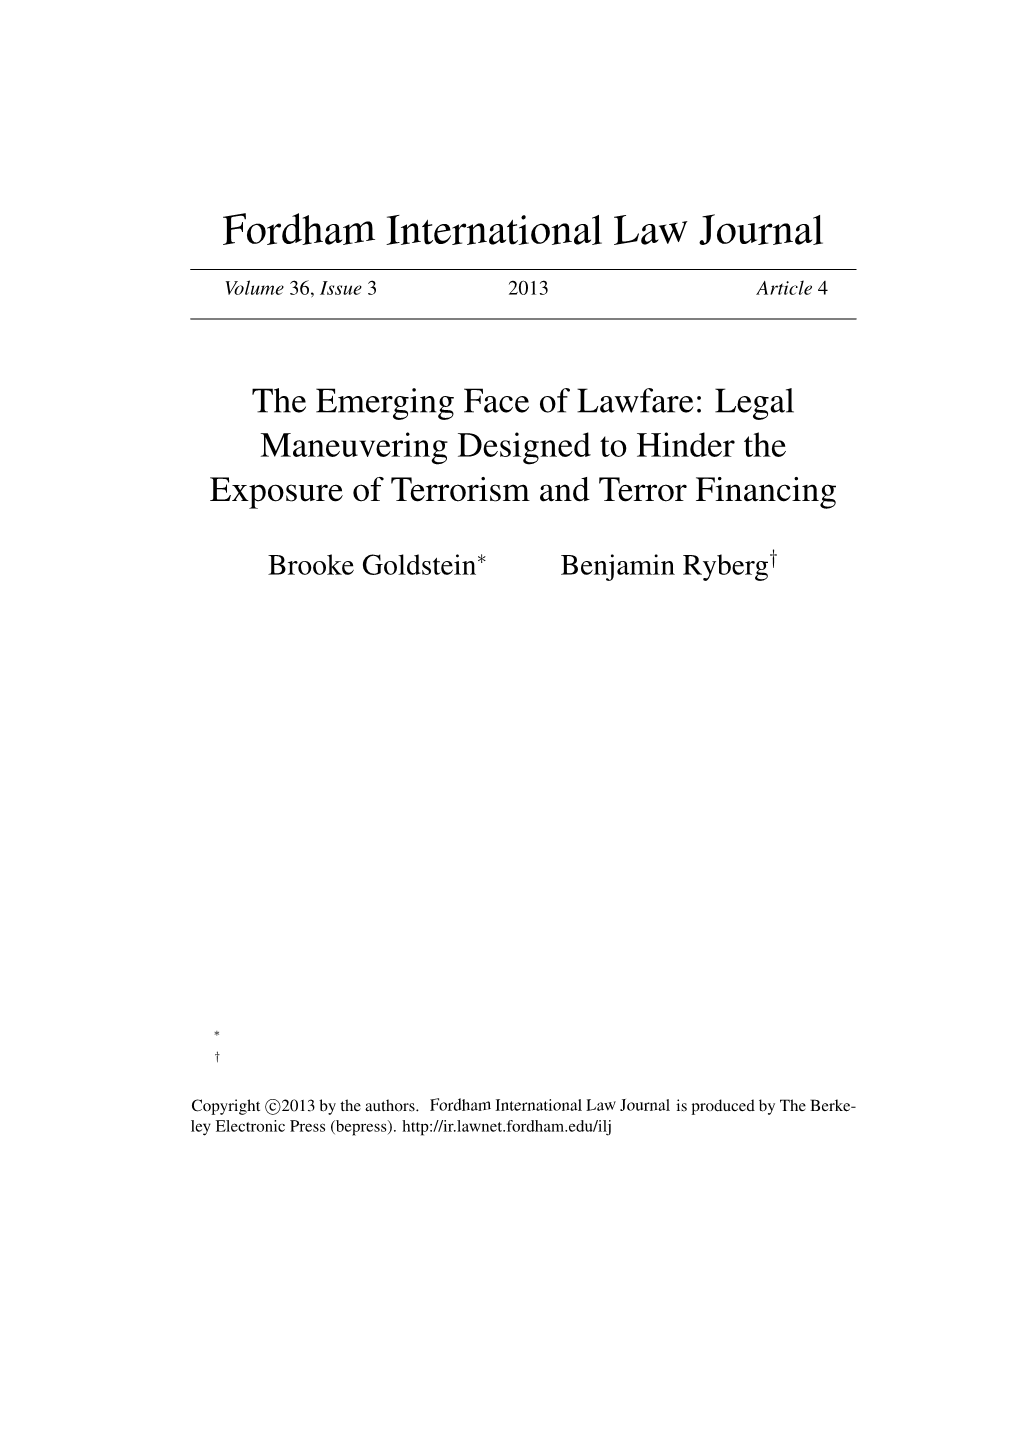 The Emerging Face of Lawfare: Legal Maneuvering Designed to Hinder the Exposure of Terrorism and Terror Financing